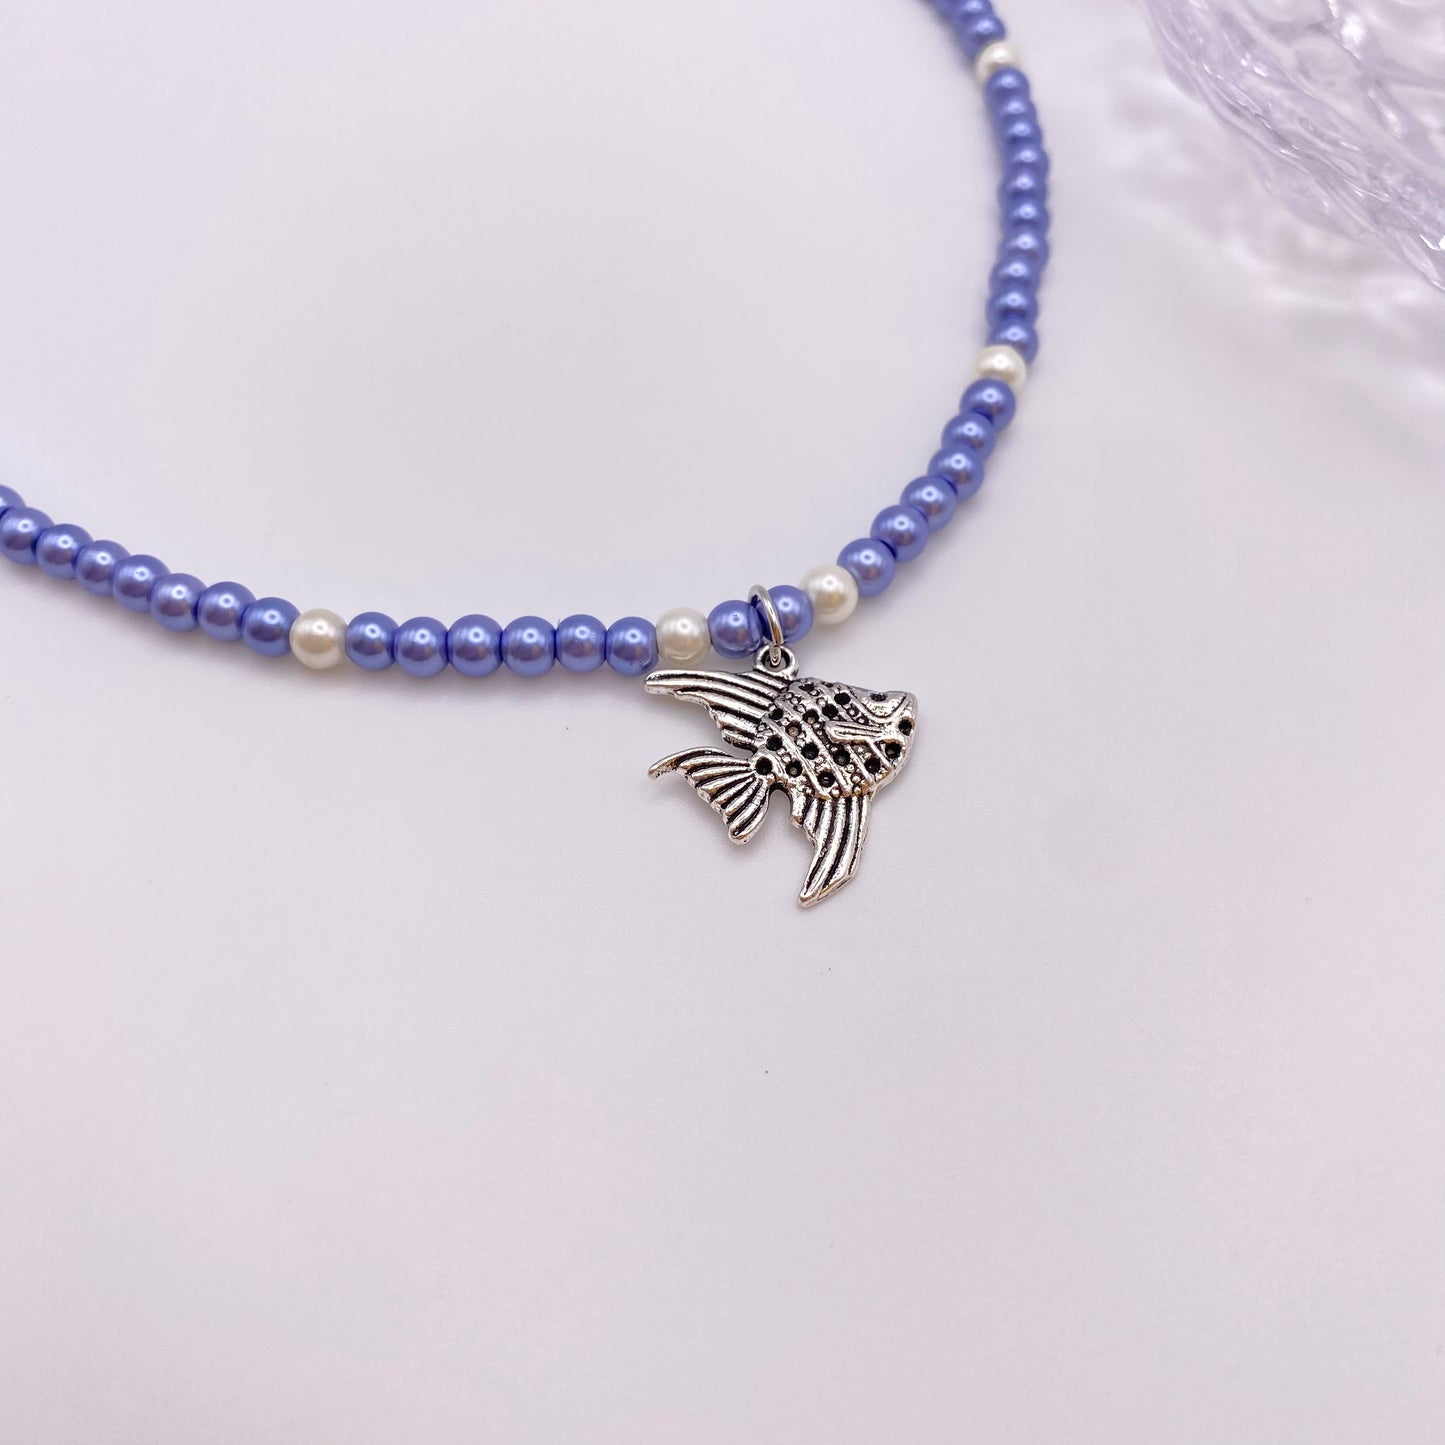 Blue and White Pearl Beaded Necklace with Fish